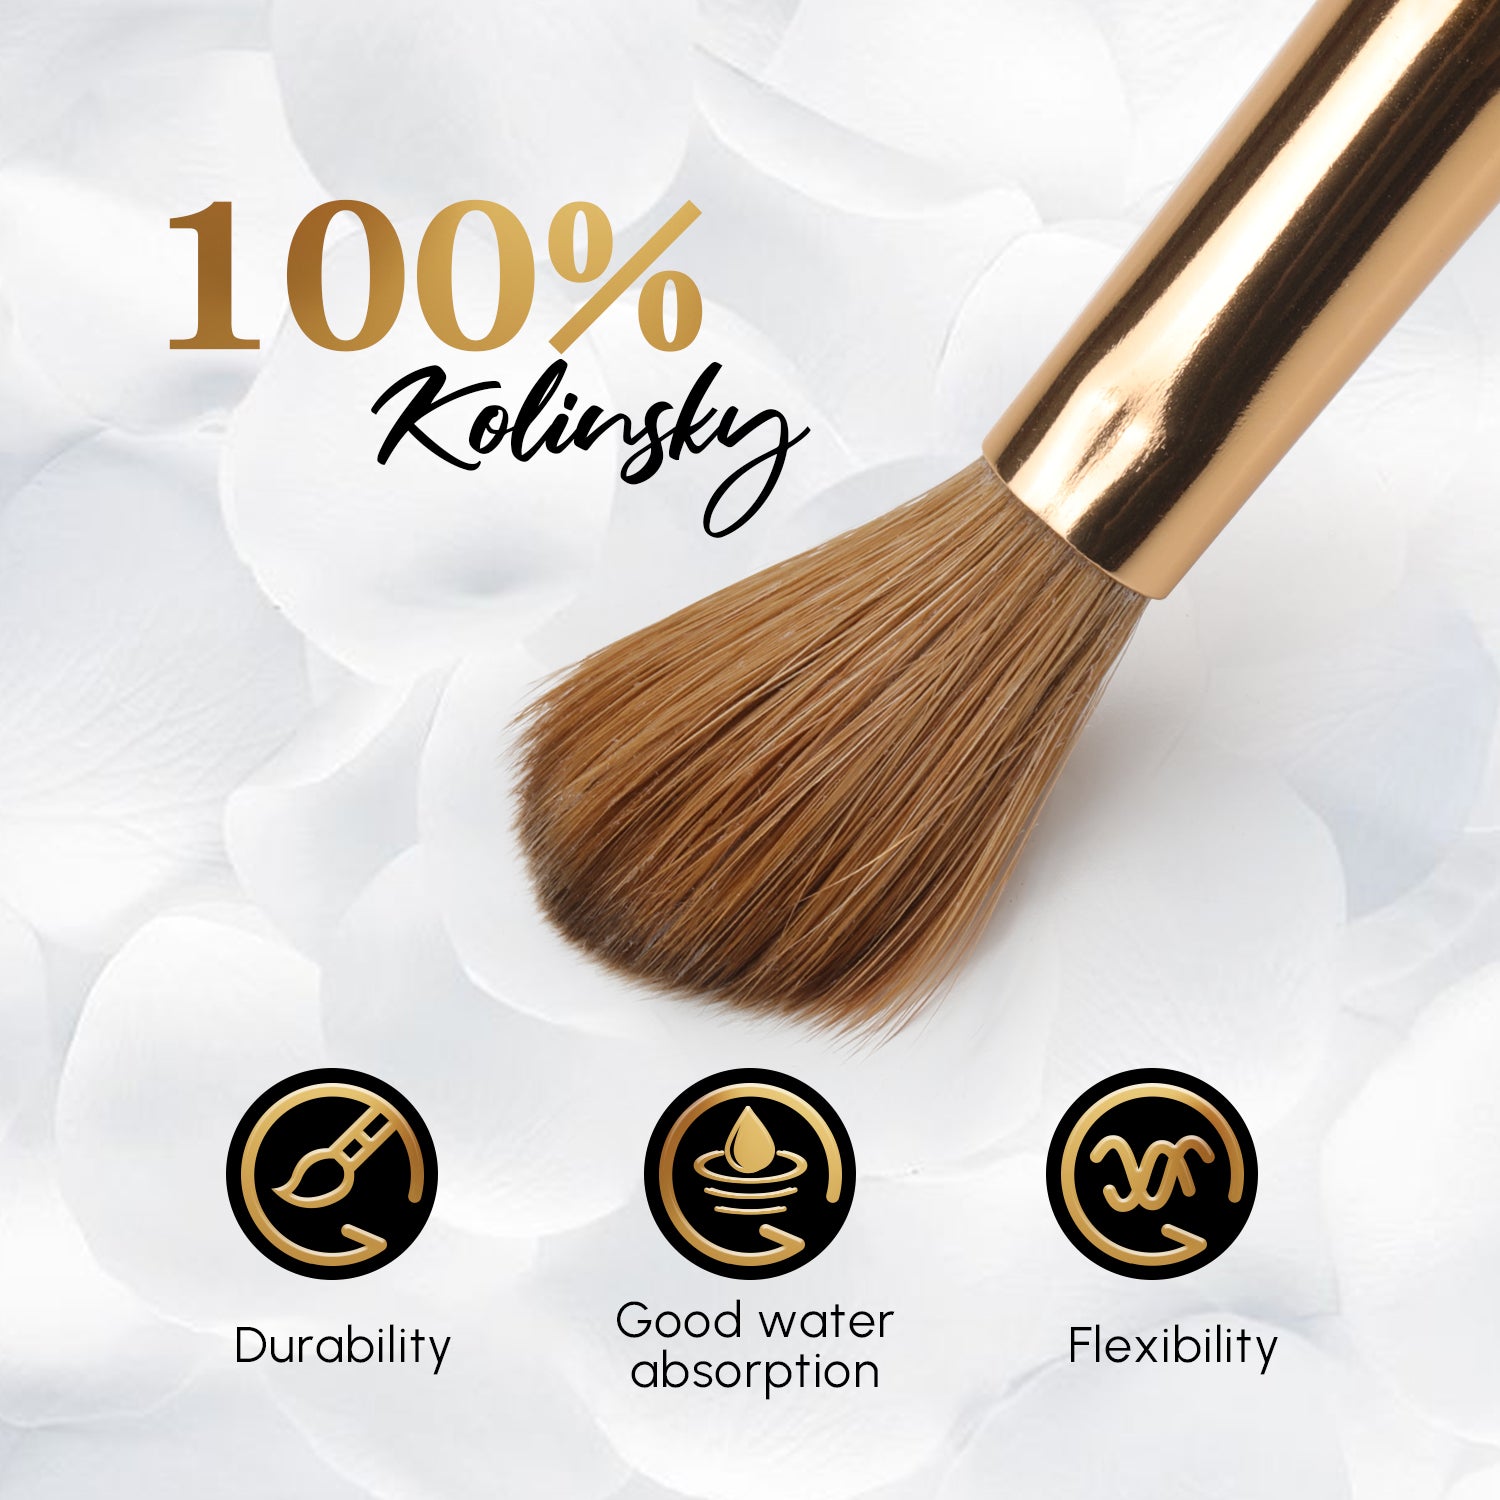 Dashboard Beauty Acrylic Nail Brush - 100% Authentic Kolinsky Sable Nail Brushes for Acrylic Application - Create Same Beautiful Nails Every Time 